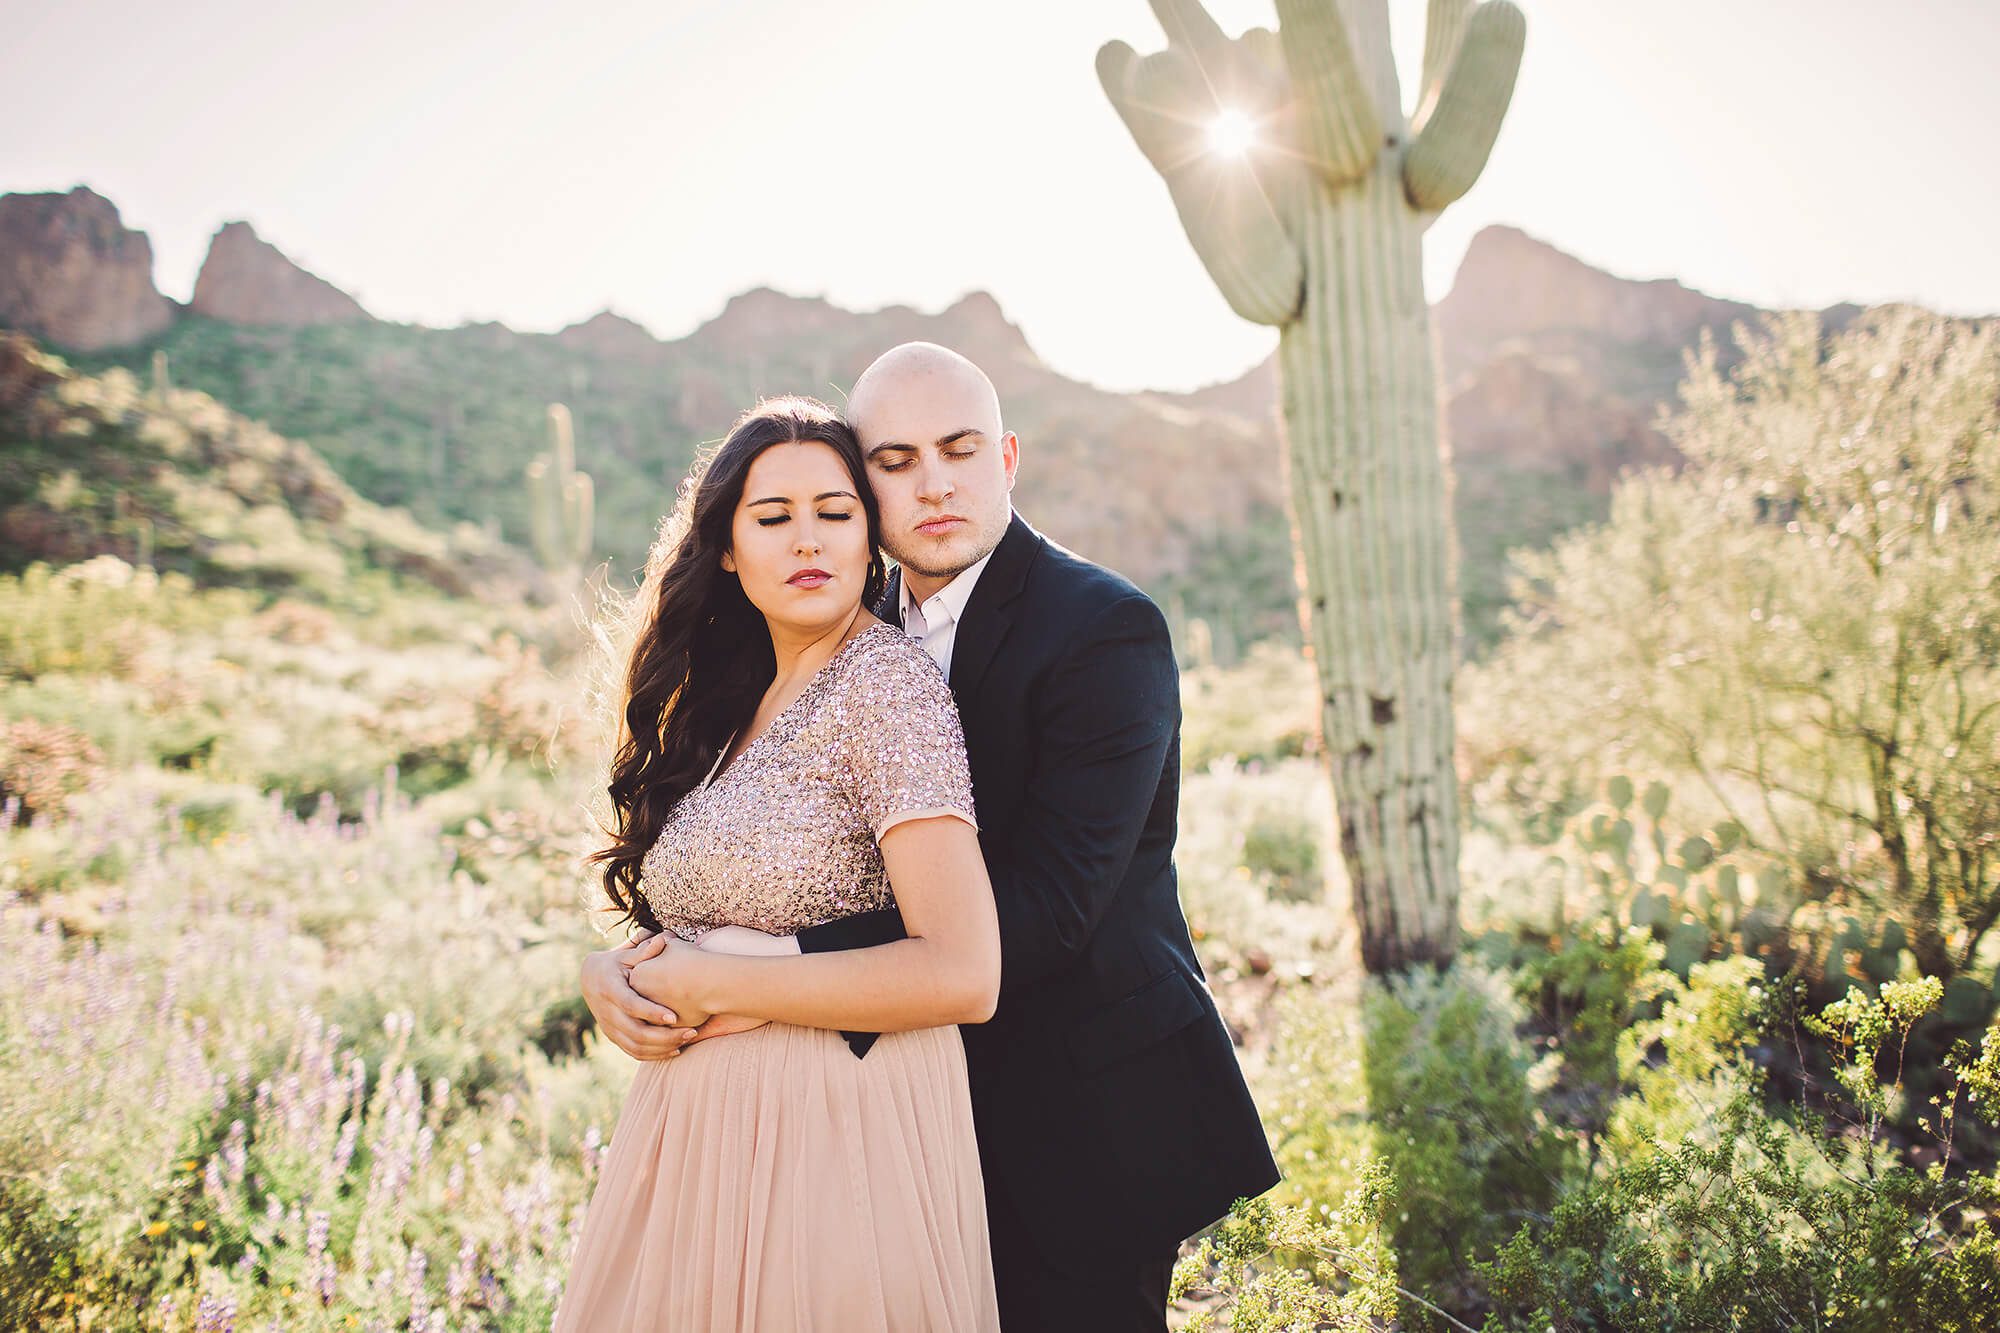 The Paxman's hold one another amidst the sun and saguaros during their Picacho Peak wildflower session